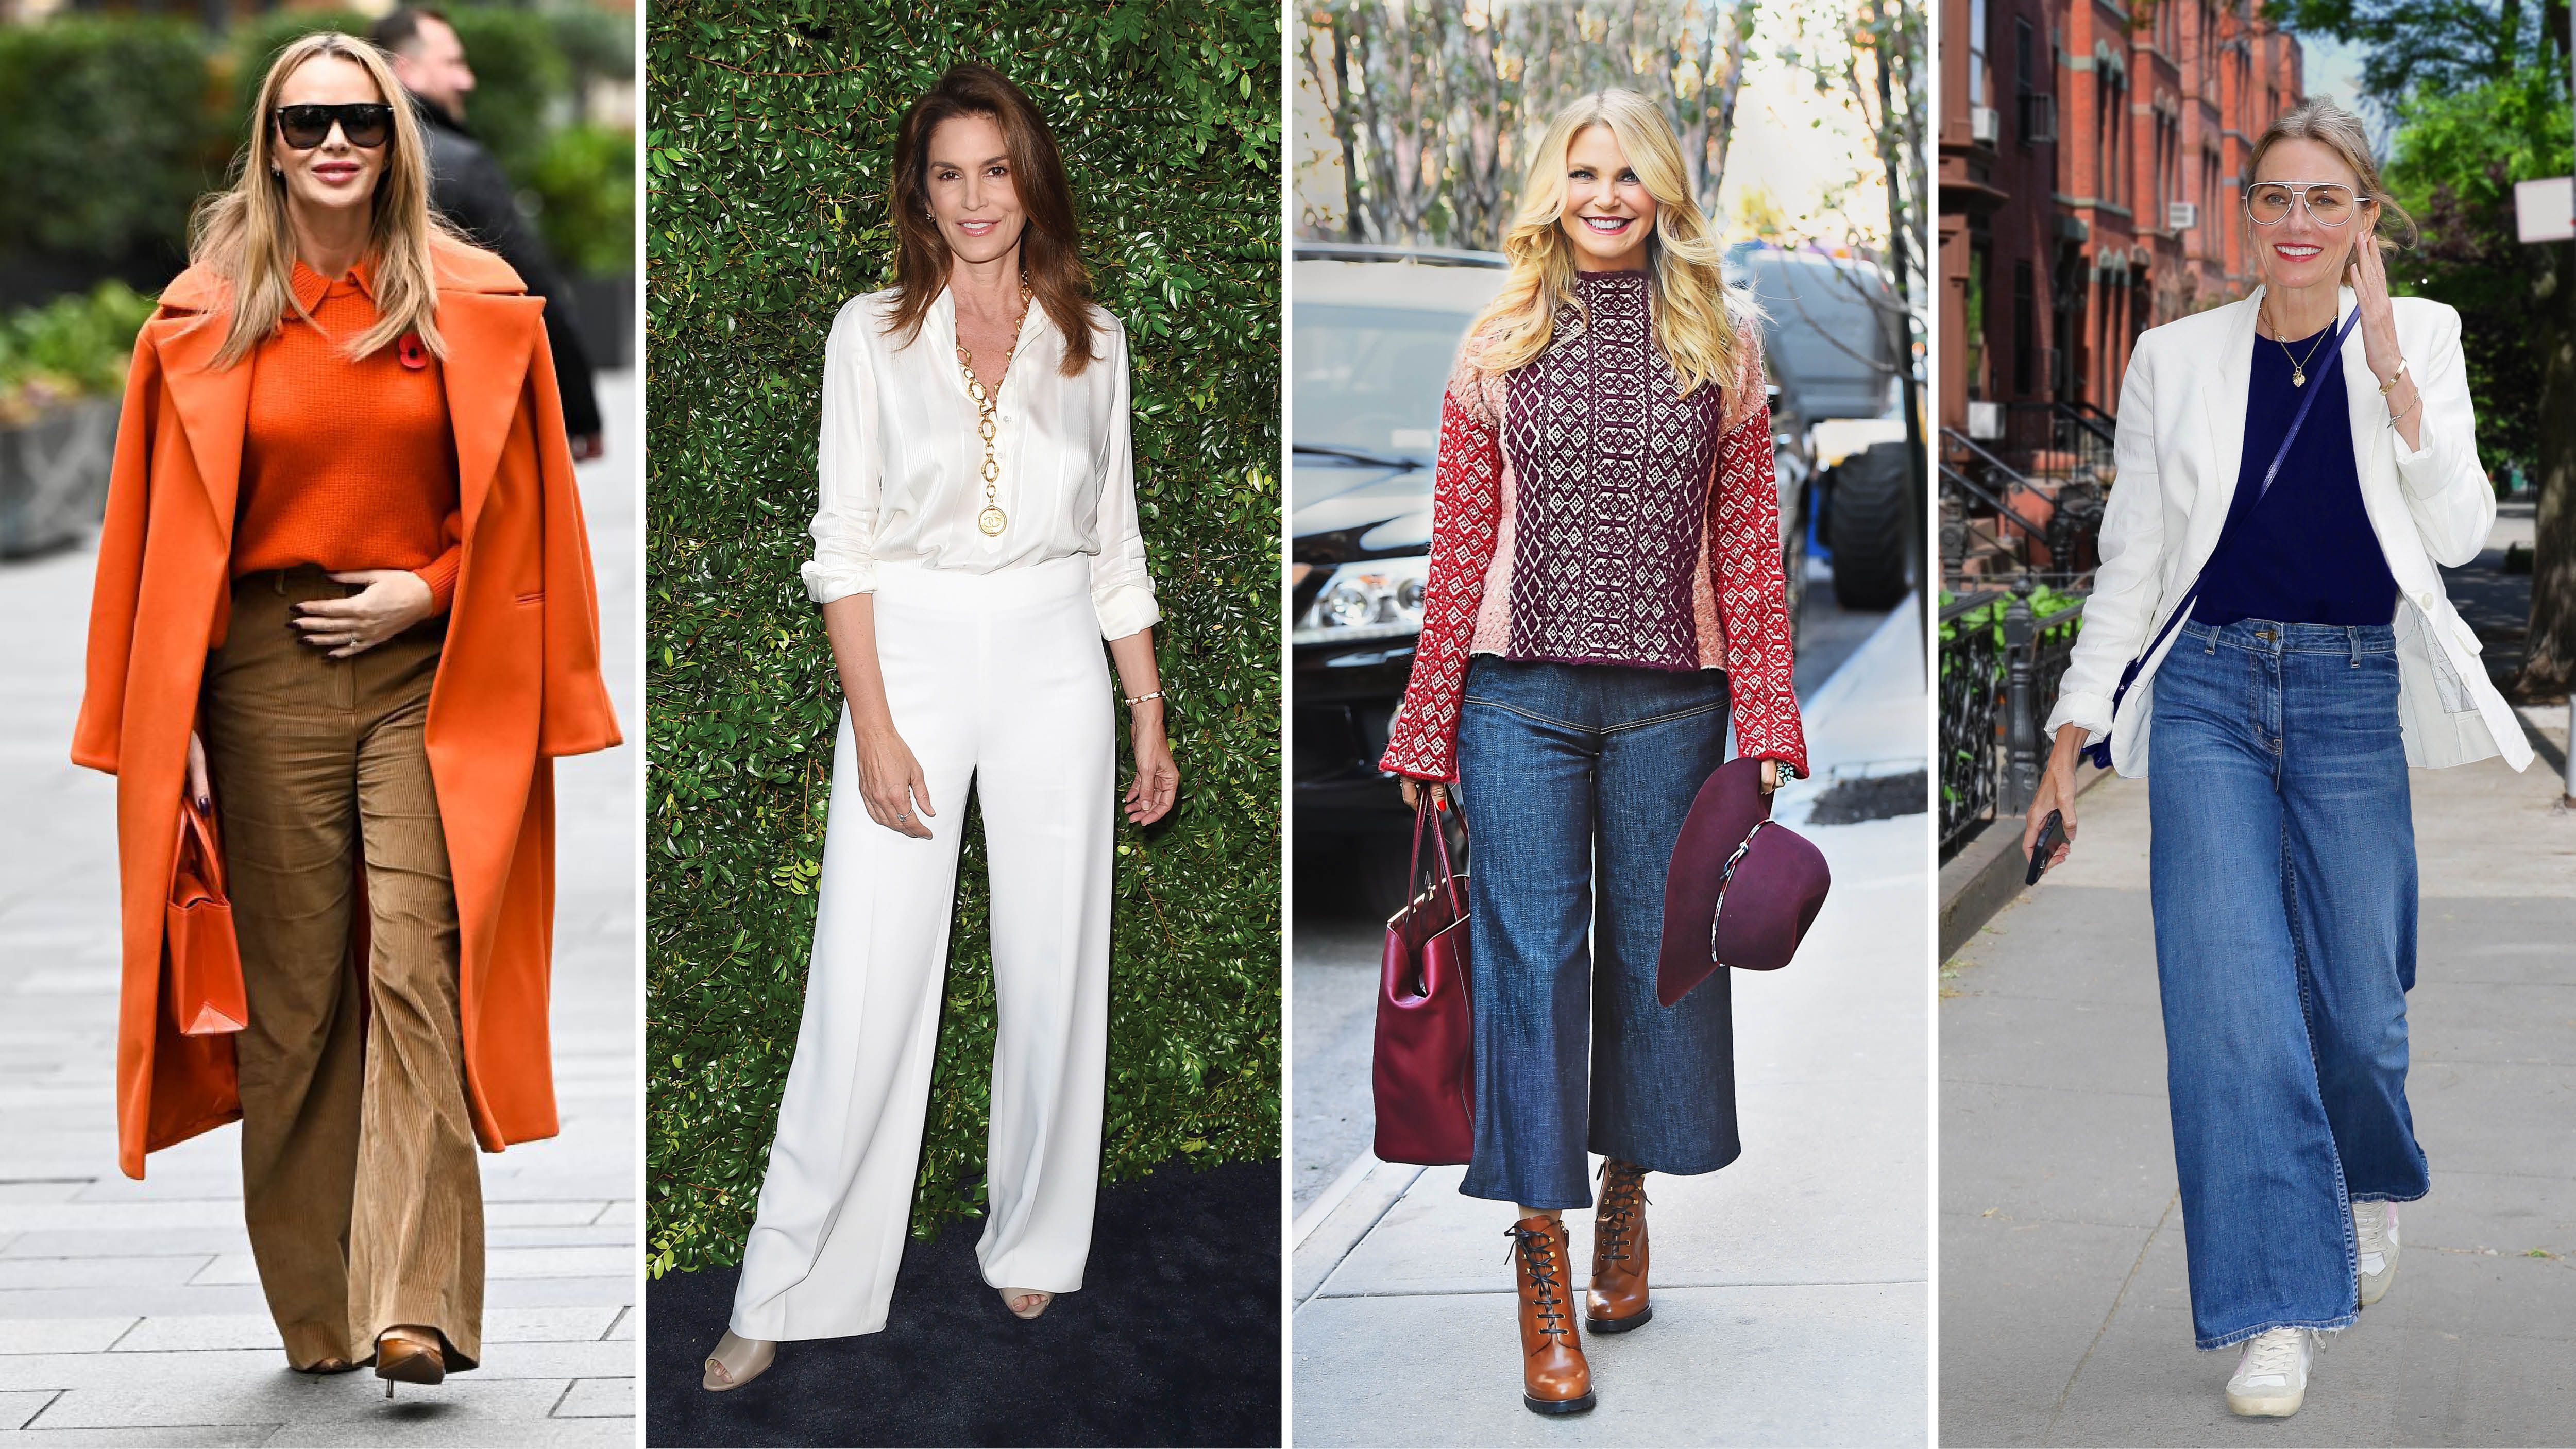 How to Style Wide Leg Pants for Women Over 50